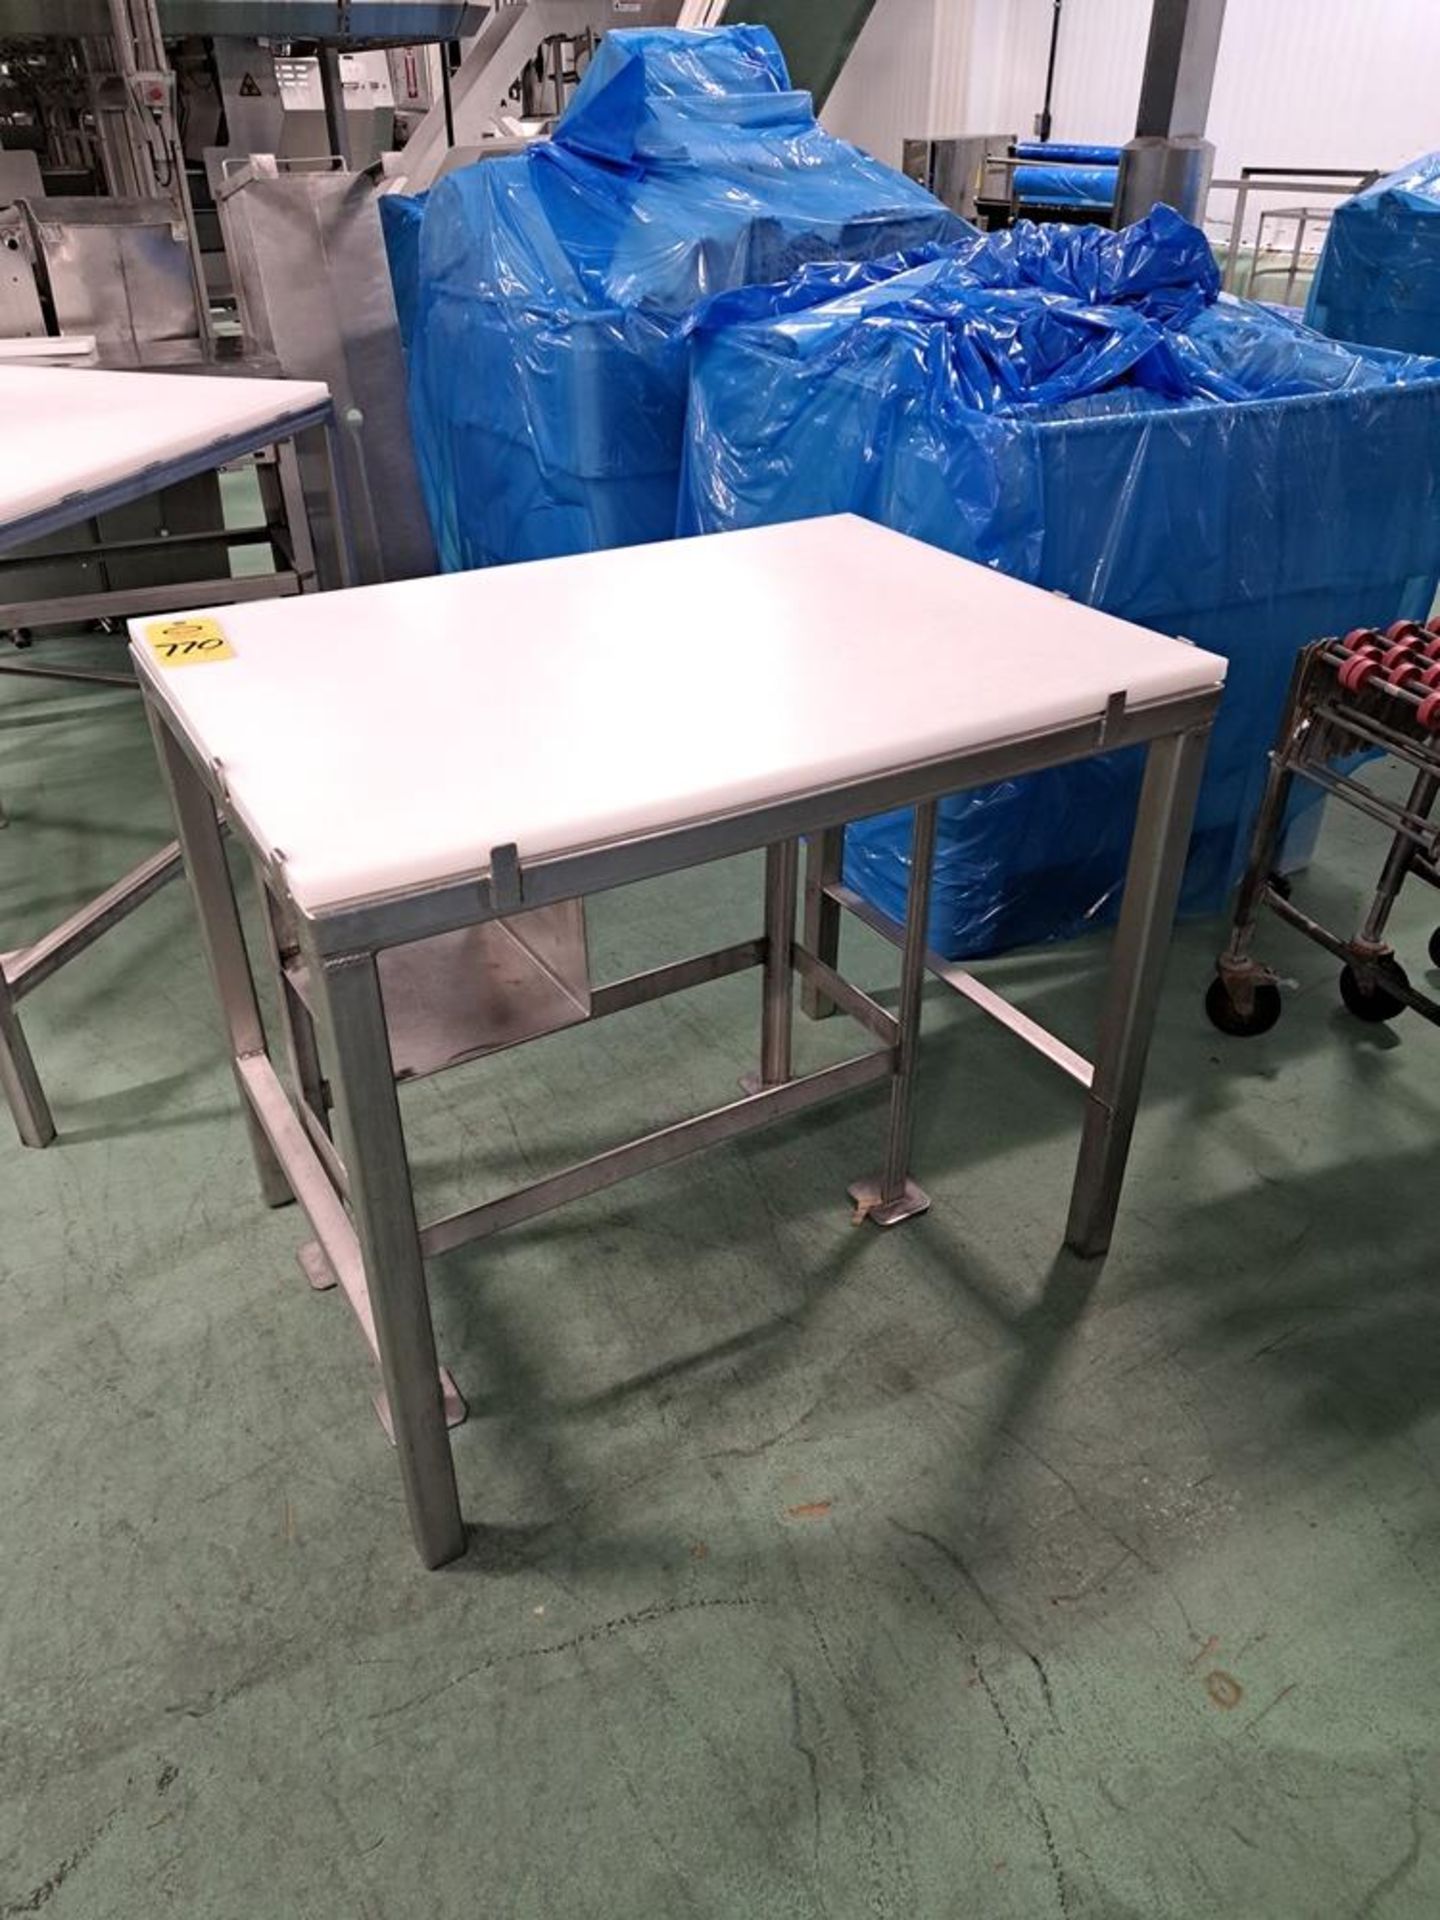 Stainless Steel Table, 30" W X 42" L X 36" T, poly top: Required Loading Fee $50.00, Rigger-Norm